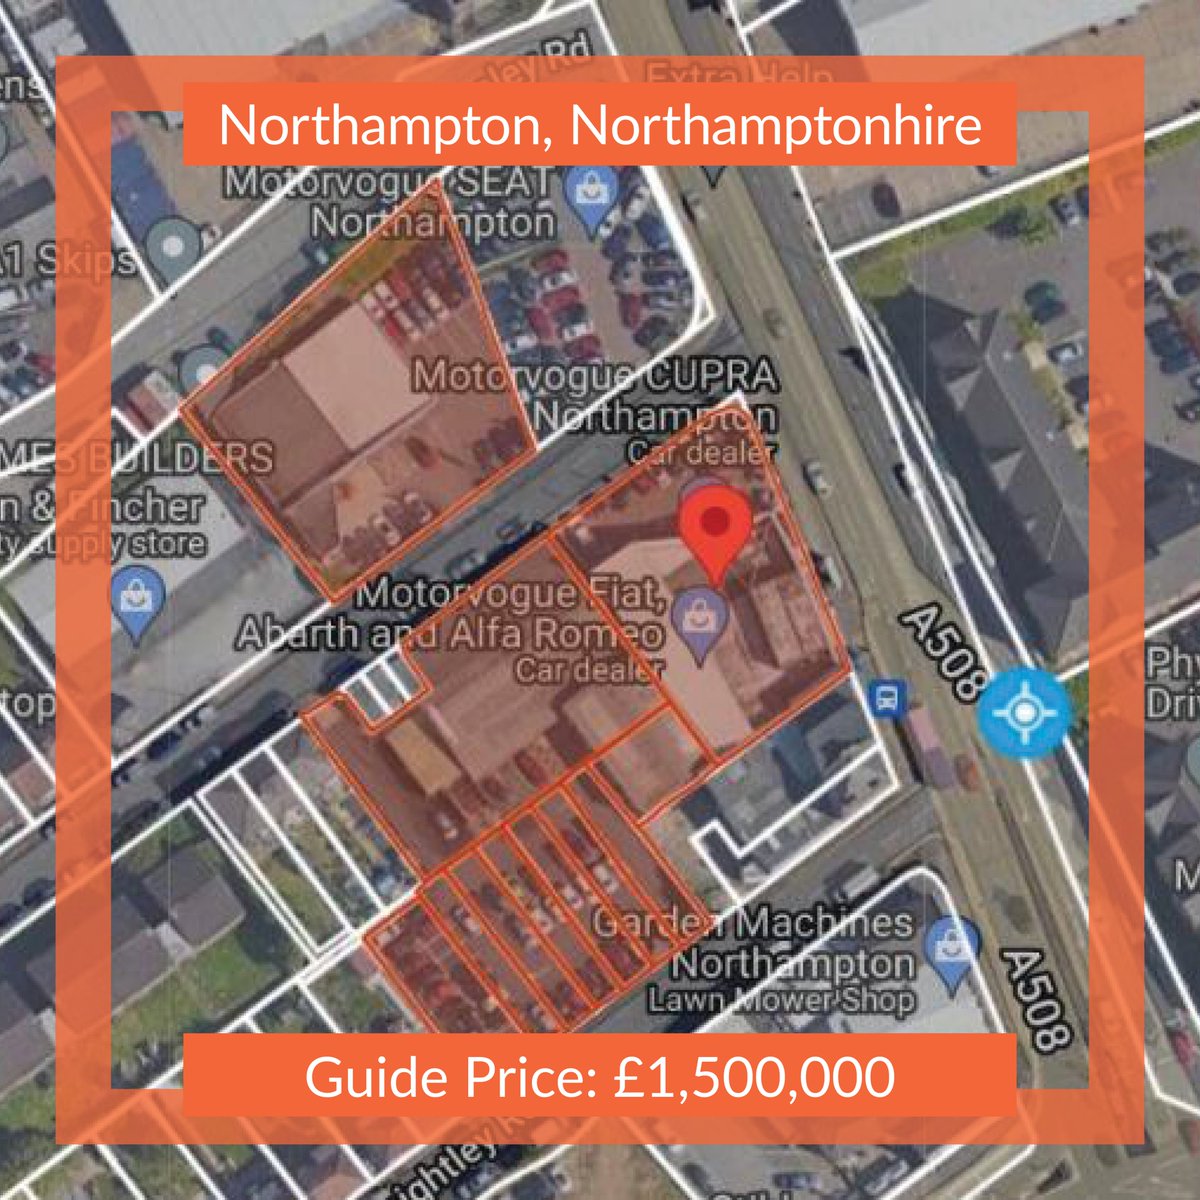 NEW LISTING in #Northampton
Guide: £1,500,000
Auction: 11/07/23
Website: whoobid.co.uk/accueil/auctio…

#whoobid #propertyauction #houseauction #auction #property #buytolet #propertyinvestor #housingmarket #estateagent #quicksale #commercial #propertydeals #pricegrowth #investment